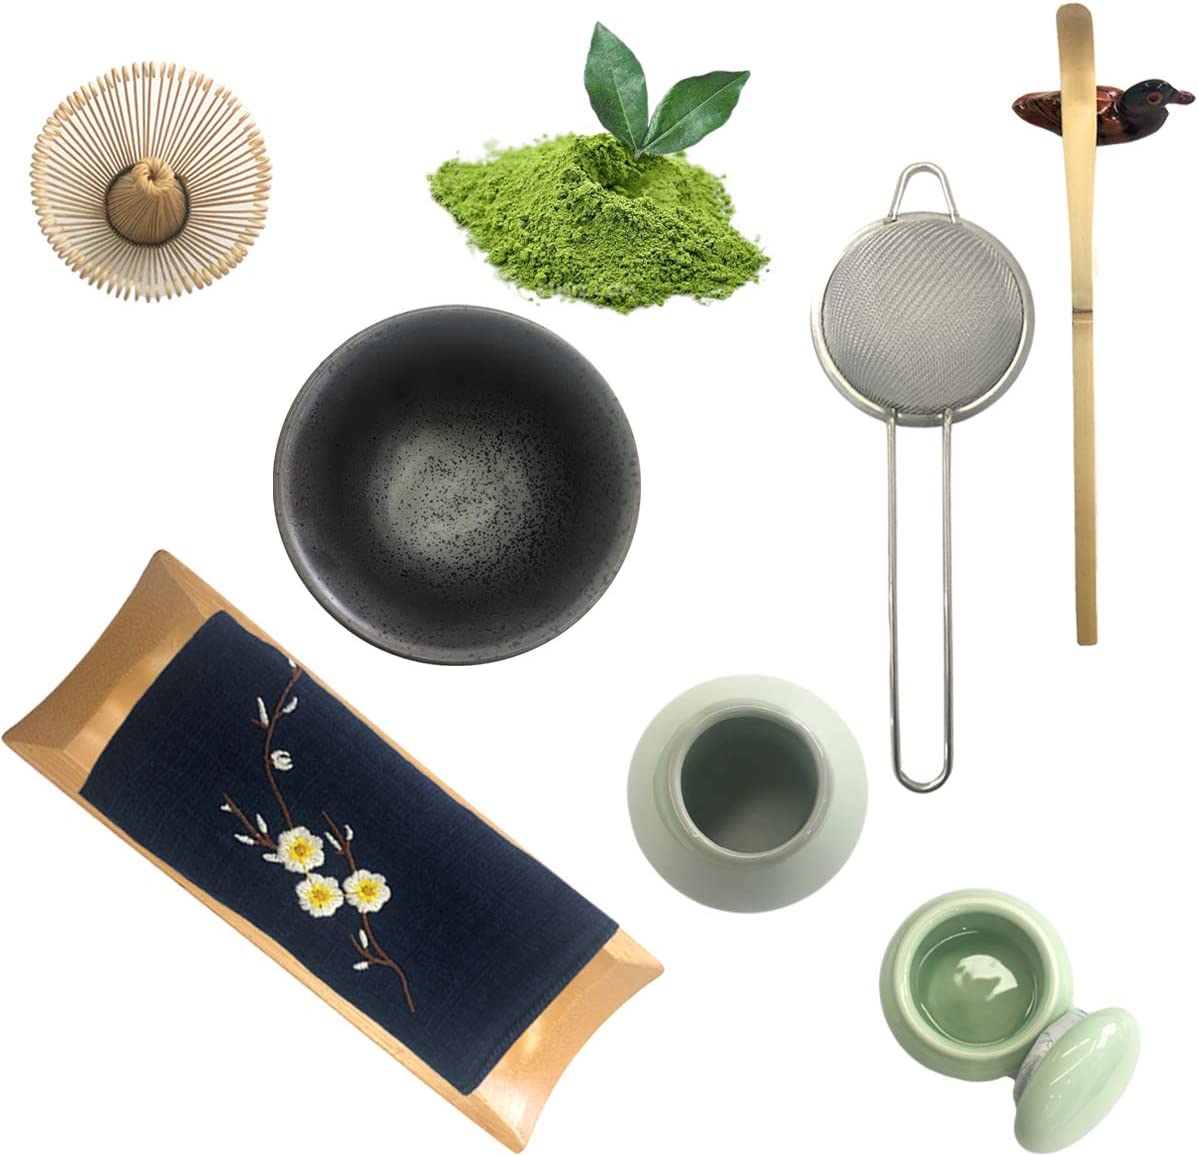 Artcome Japanese Matcha Tea Set, Bowl with Pouring Spout, Whisk, Tea Scoop,  Ceramic Whisk Holder, Matcha Powder Caddy, Handmade Matcha Ceremony Kit